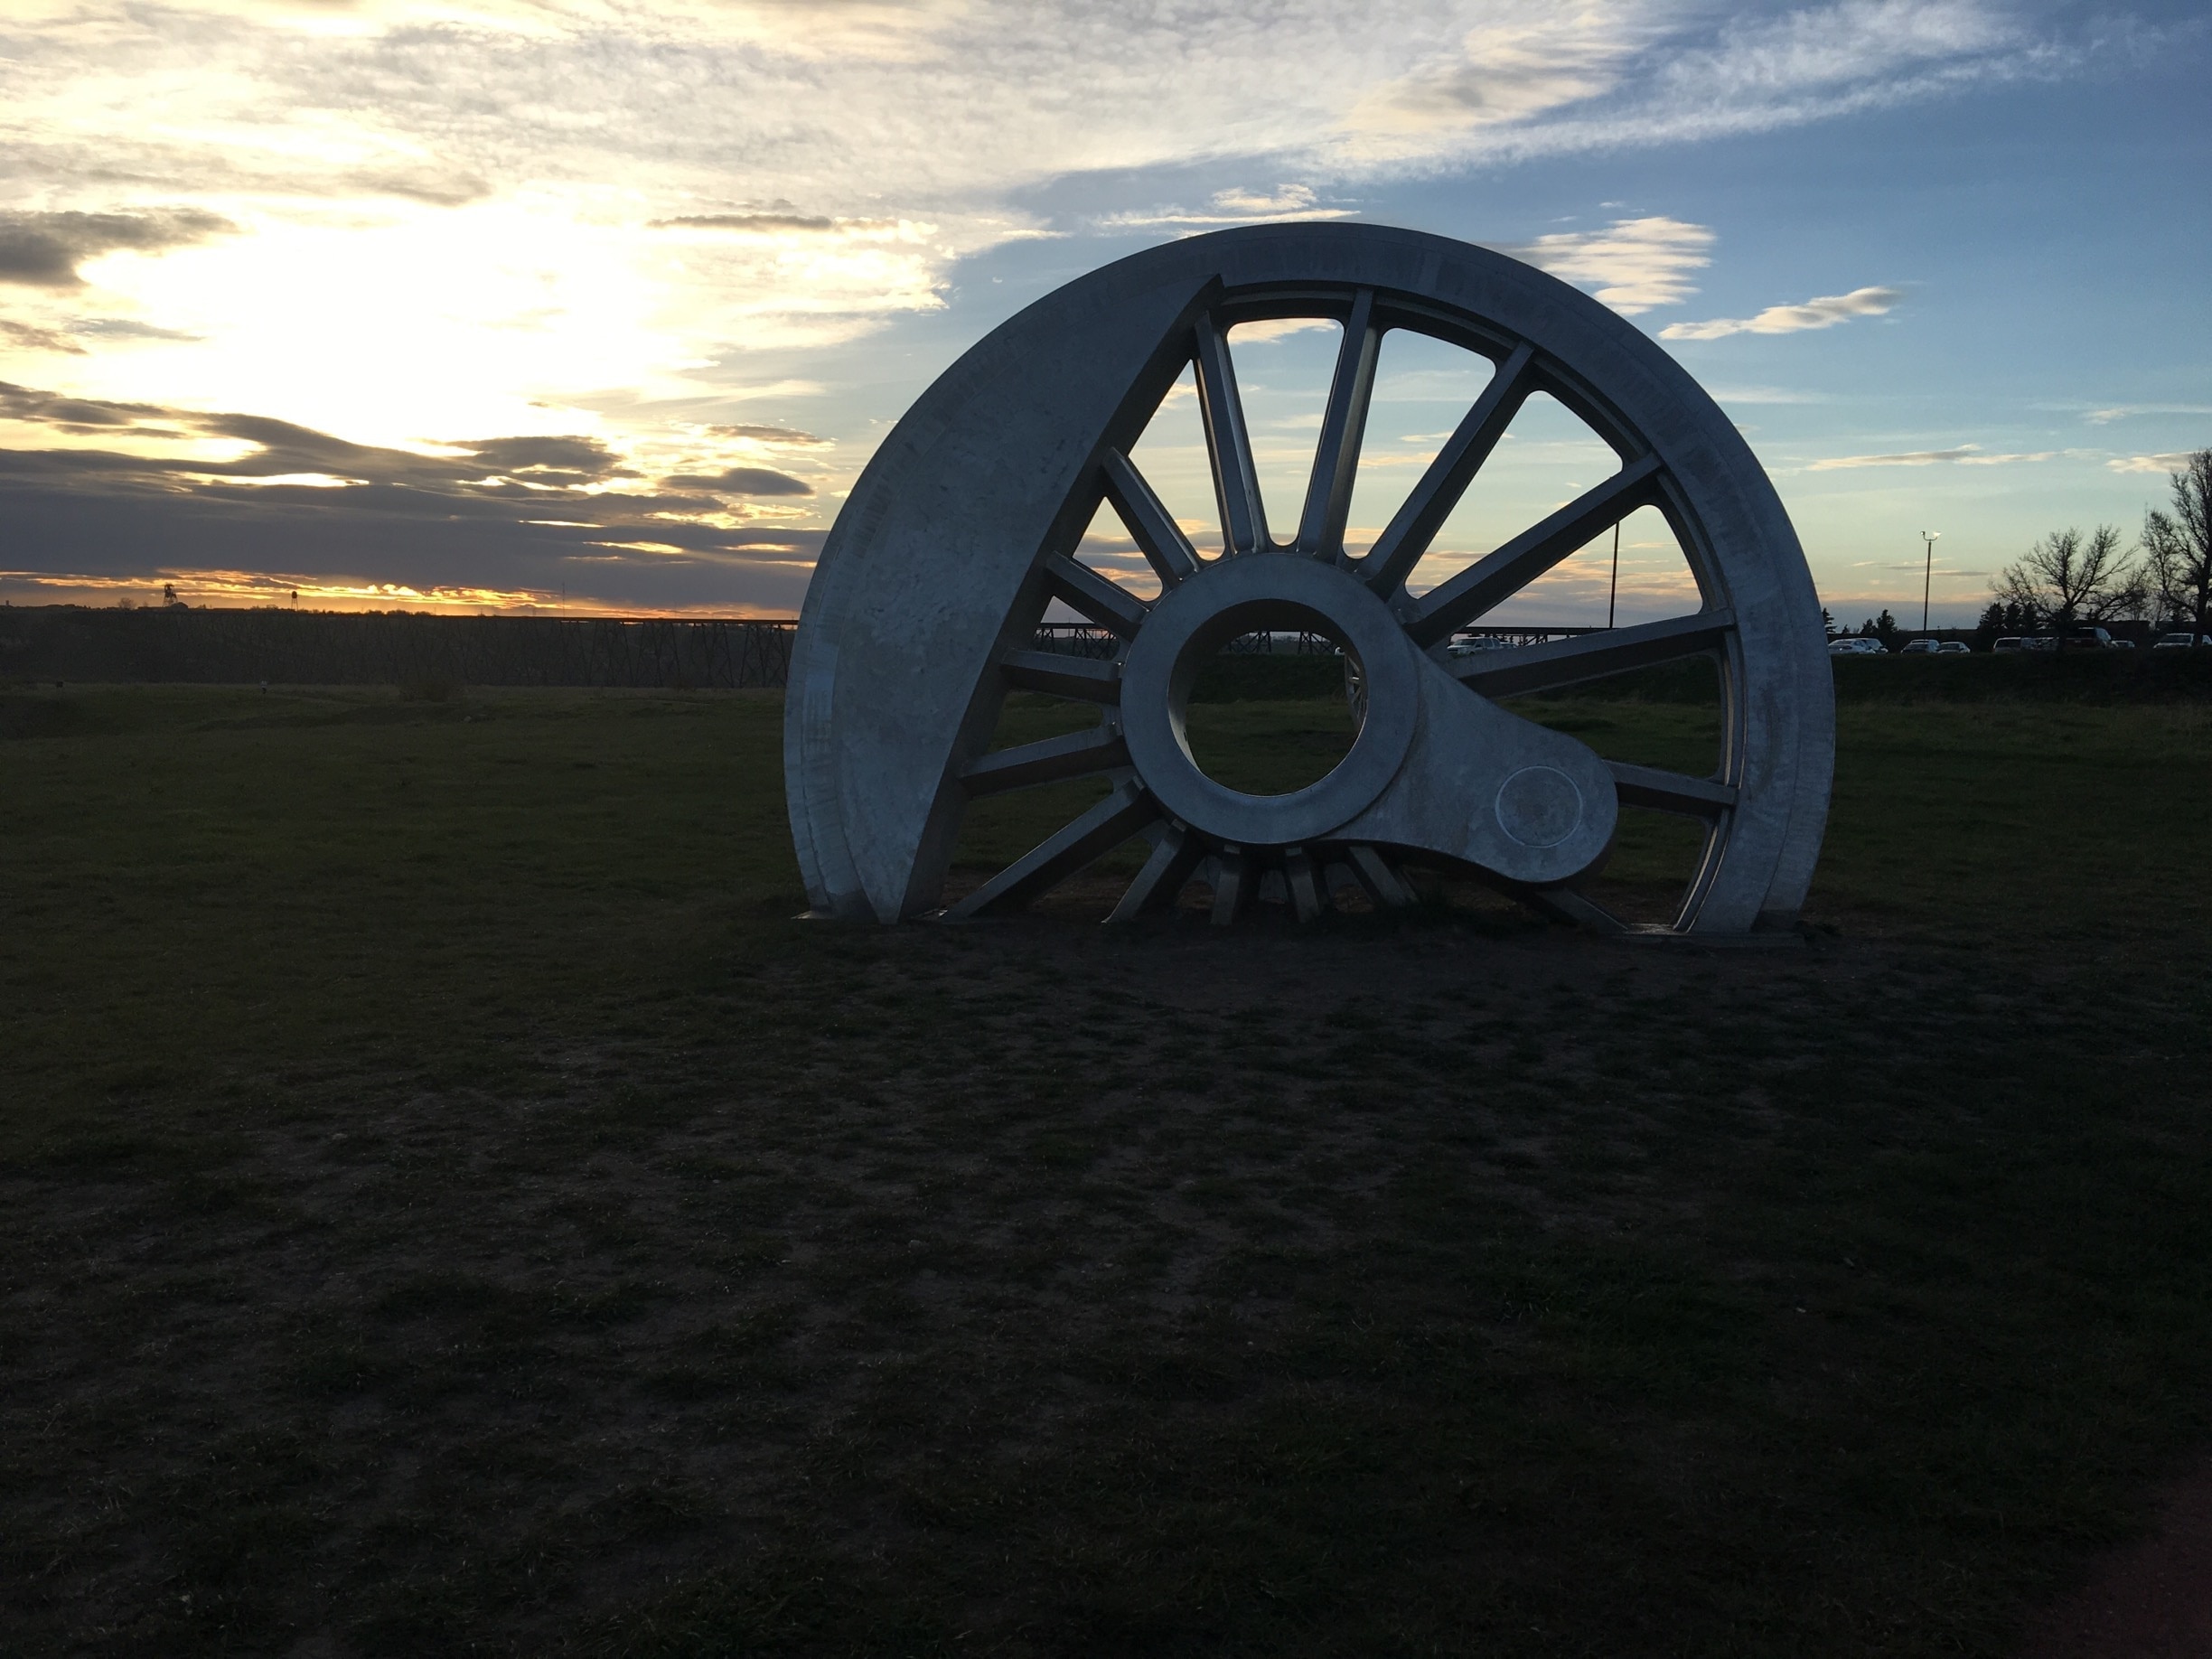 There's a path out behind the museum that leads to Indian Battle Park, you I'll find these giant wheels along the way.